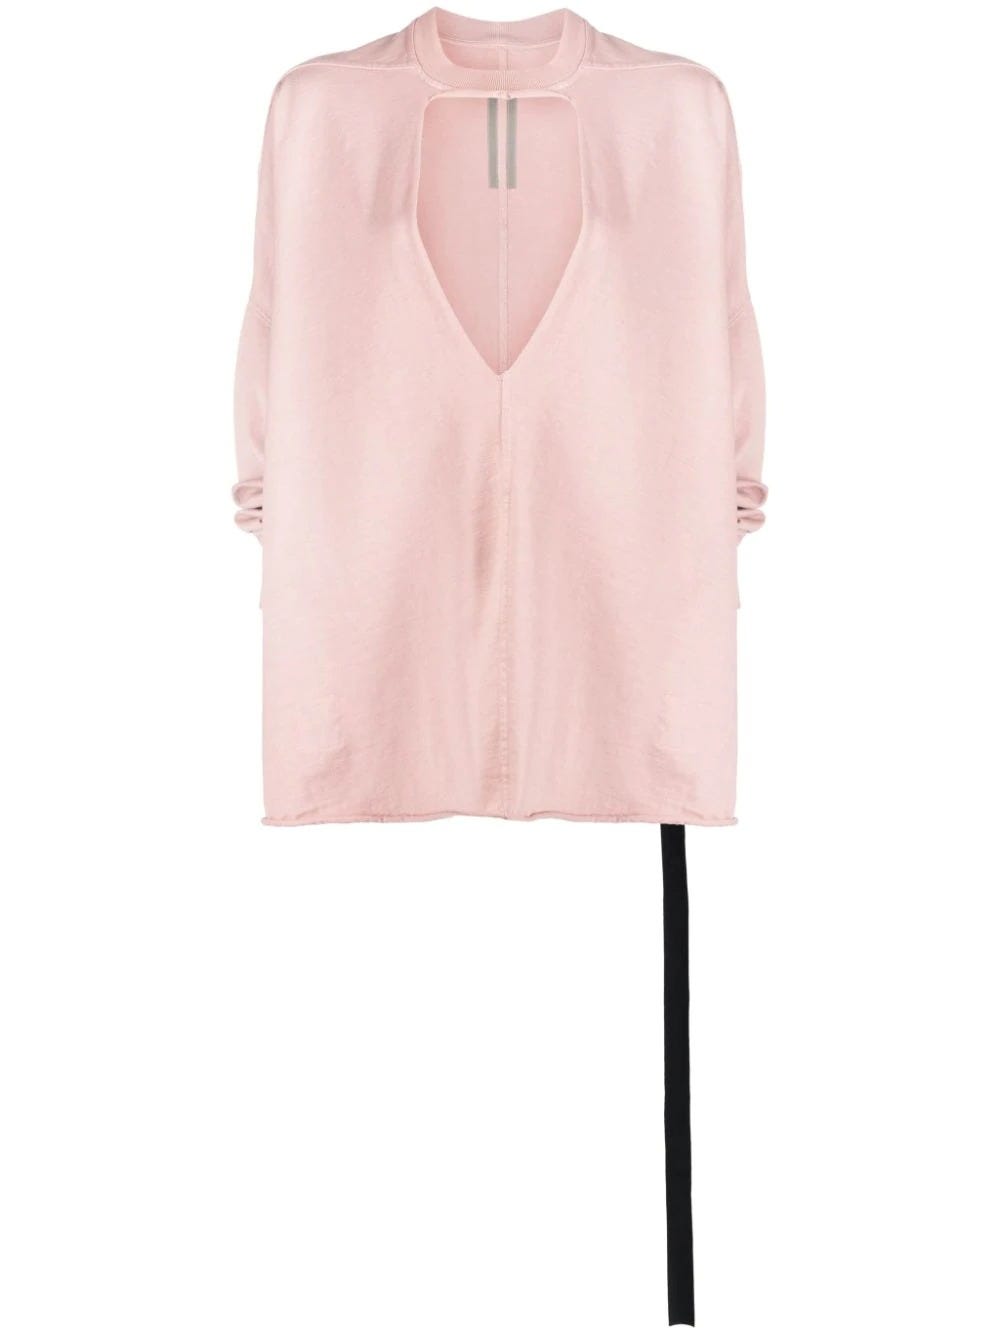 RICK OWENS DRKSHDW PINK ECLIPSE SWEATSHIRT WITH CUT-OUT DETAIL